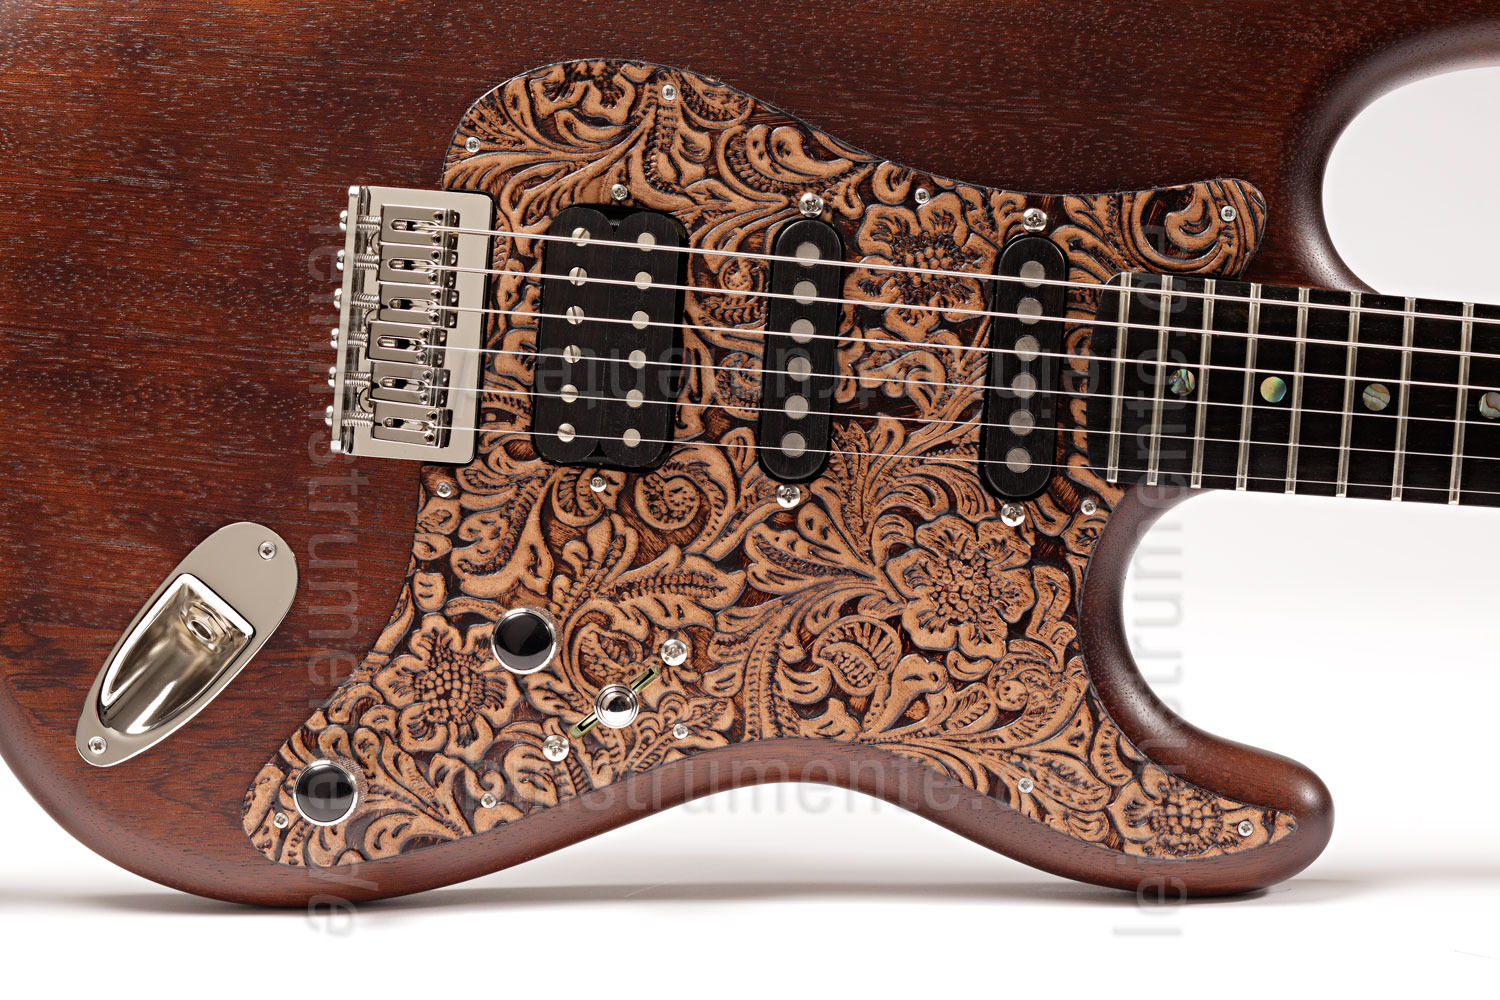 to article description / price Electric Guitar BERSTECHER Deluxe - Old Whisky / Floral Nature + hard case - made in Germany